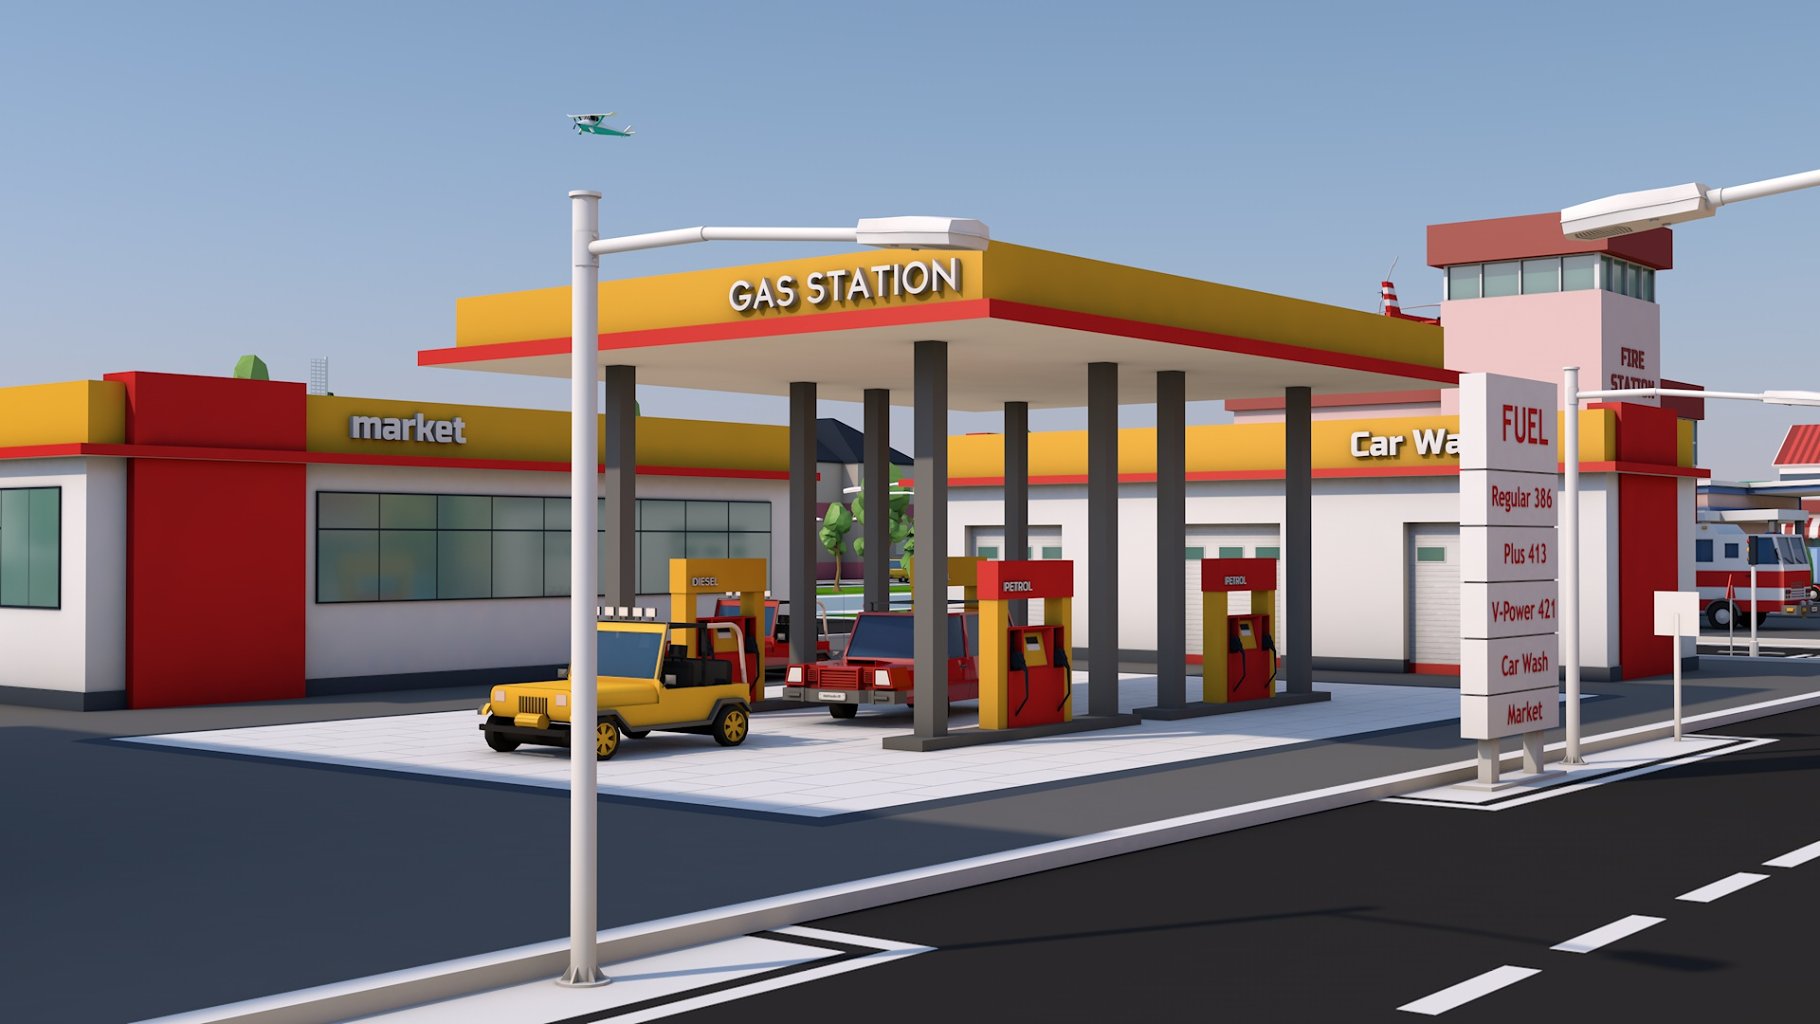 Image of gas station.